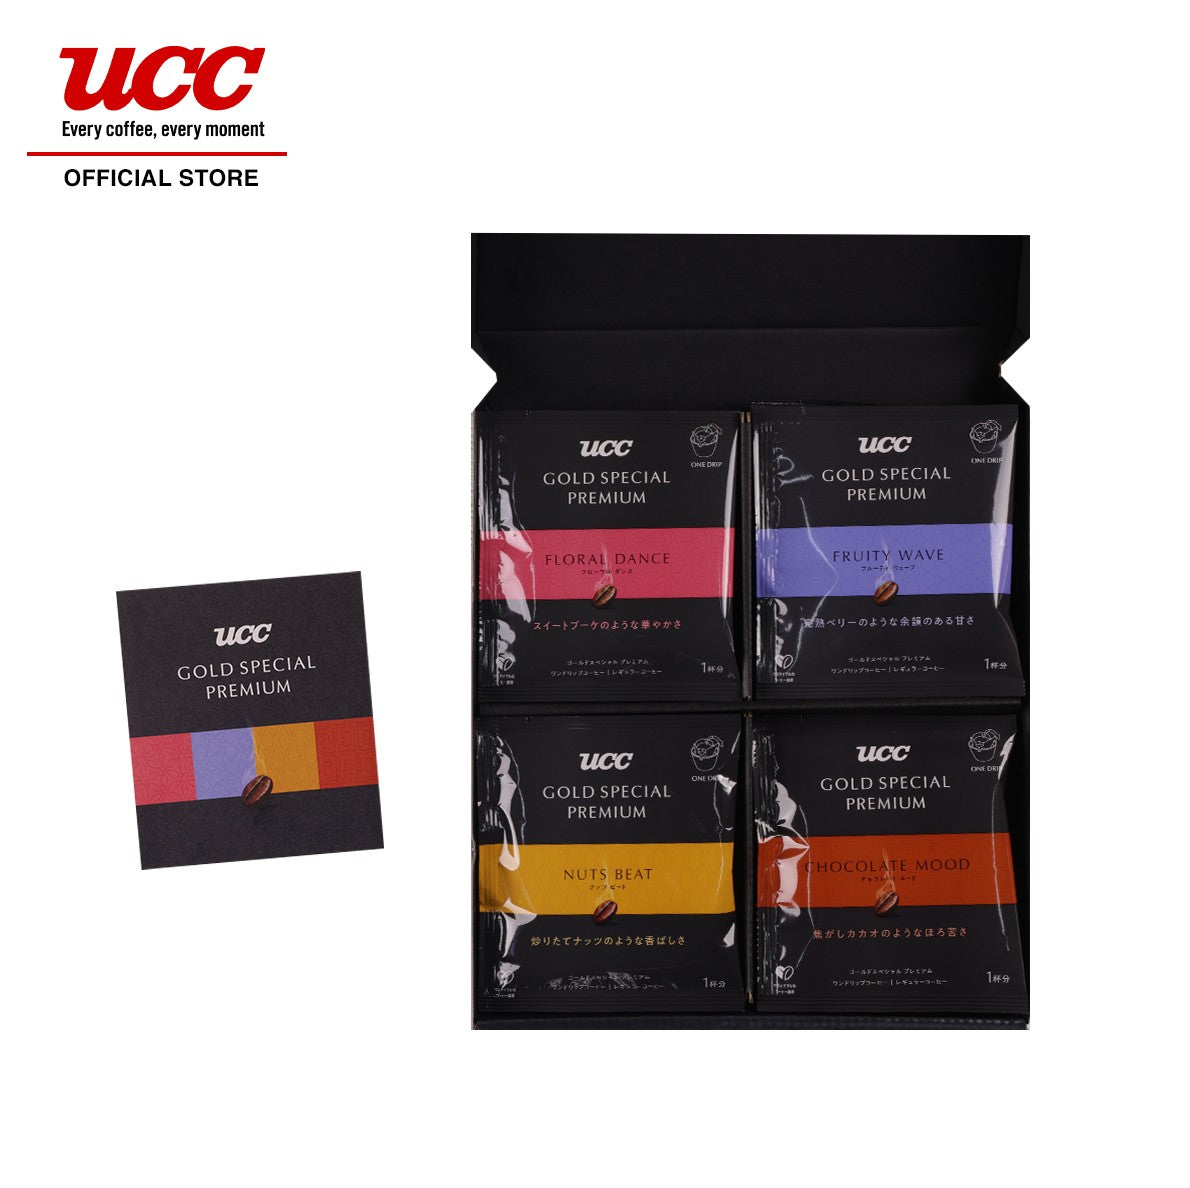 UCC Gold Special Premium Gift Set YGP-15